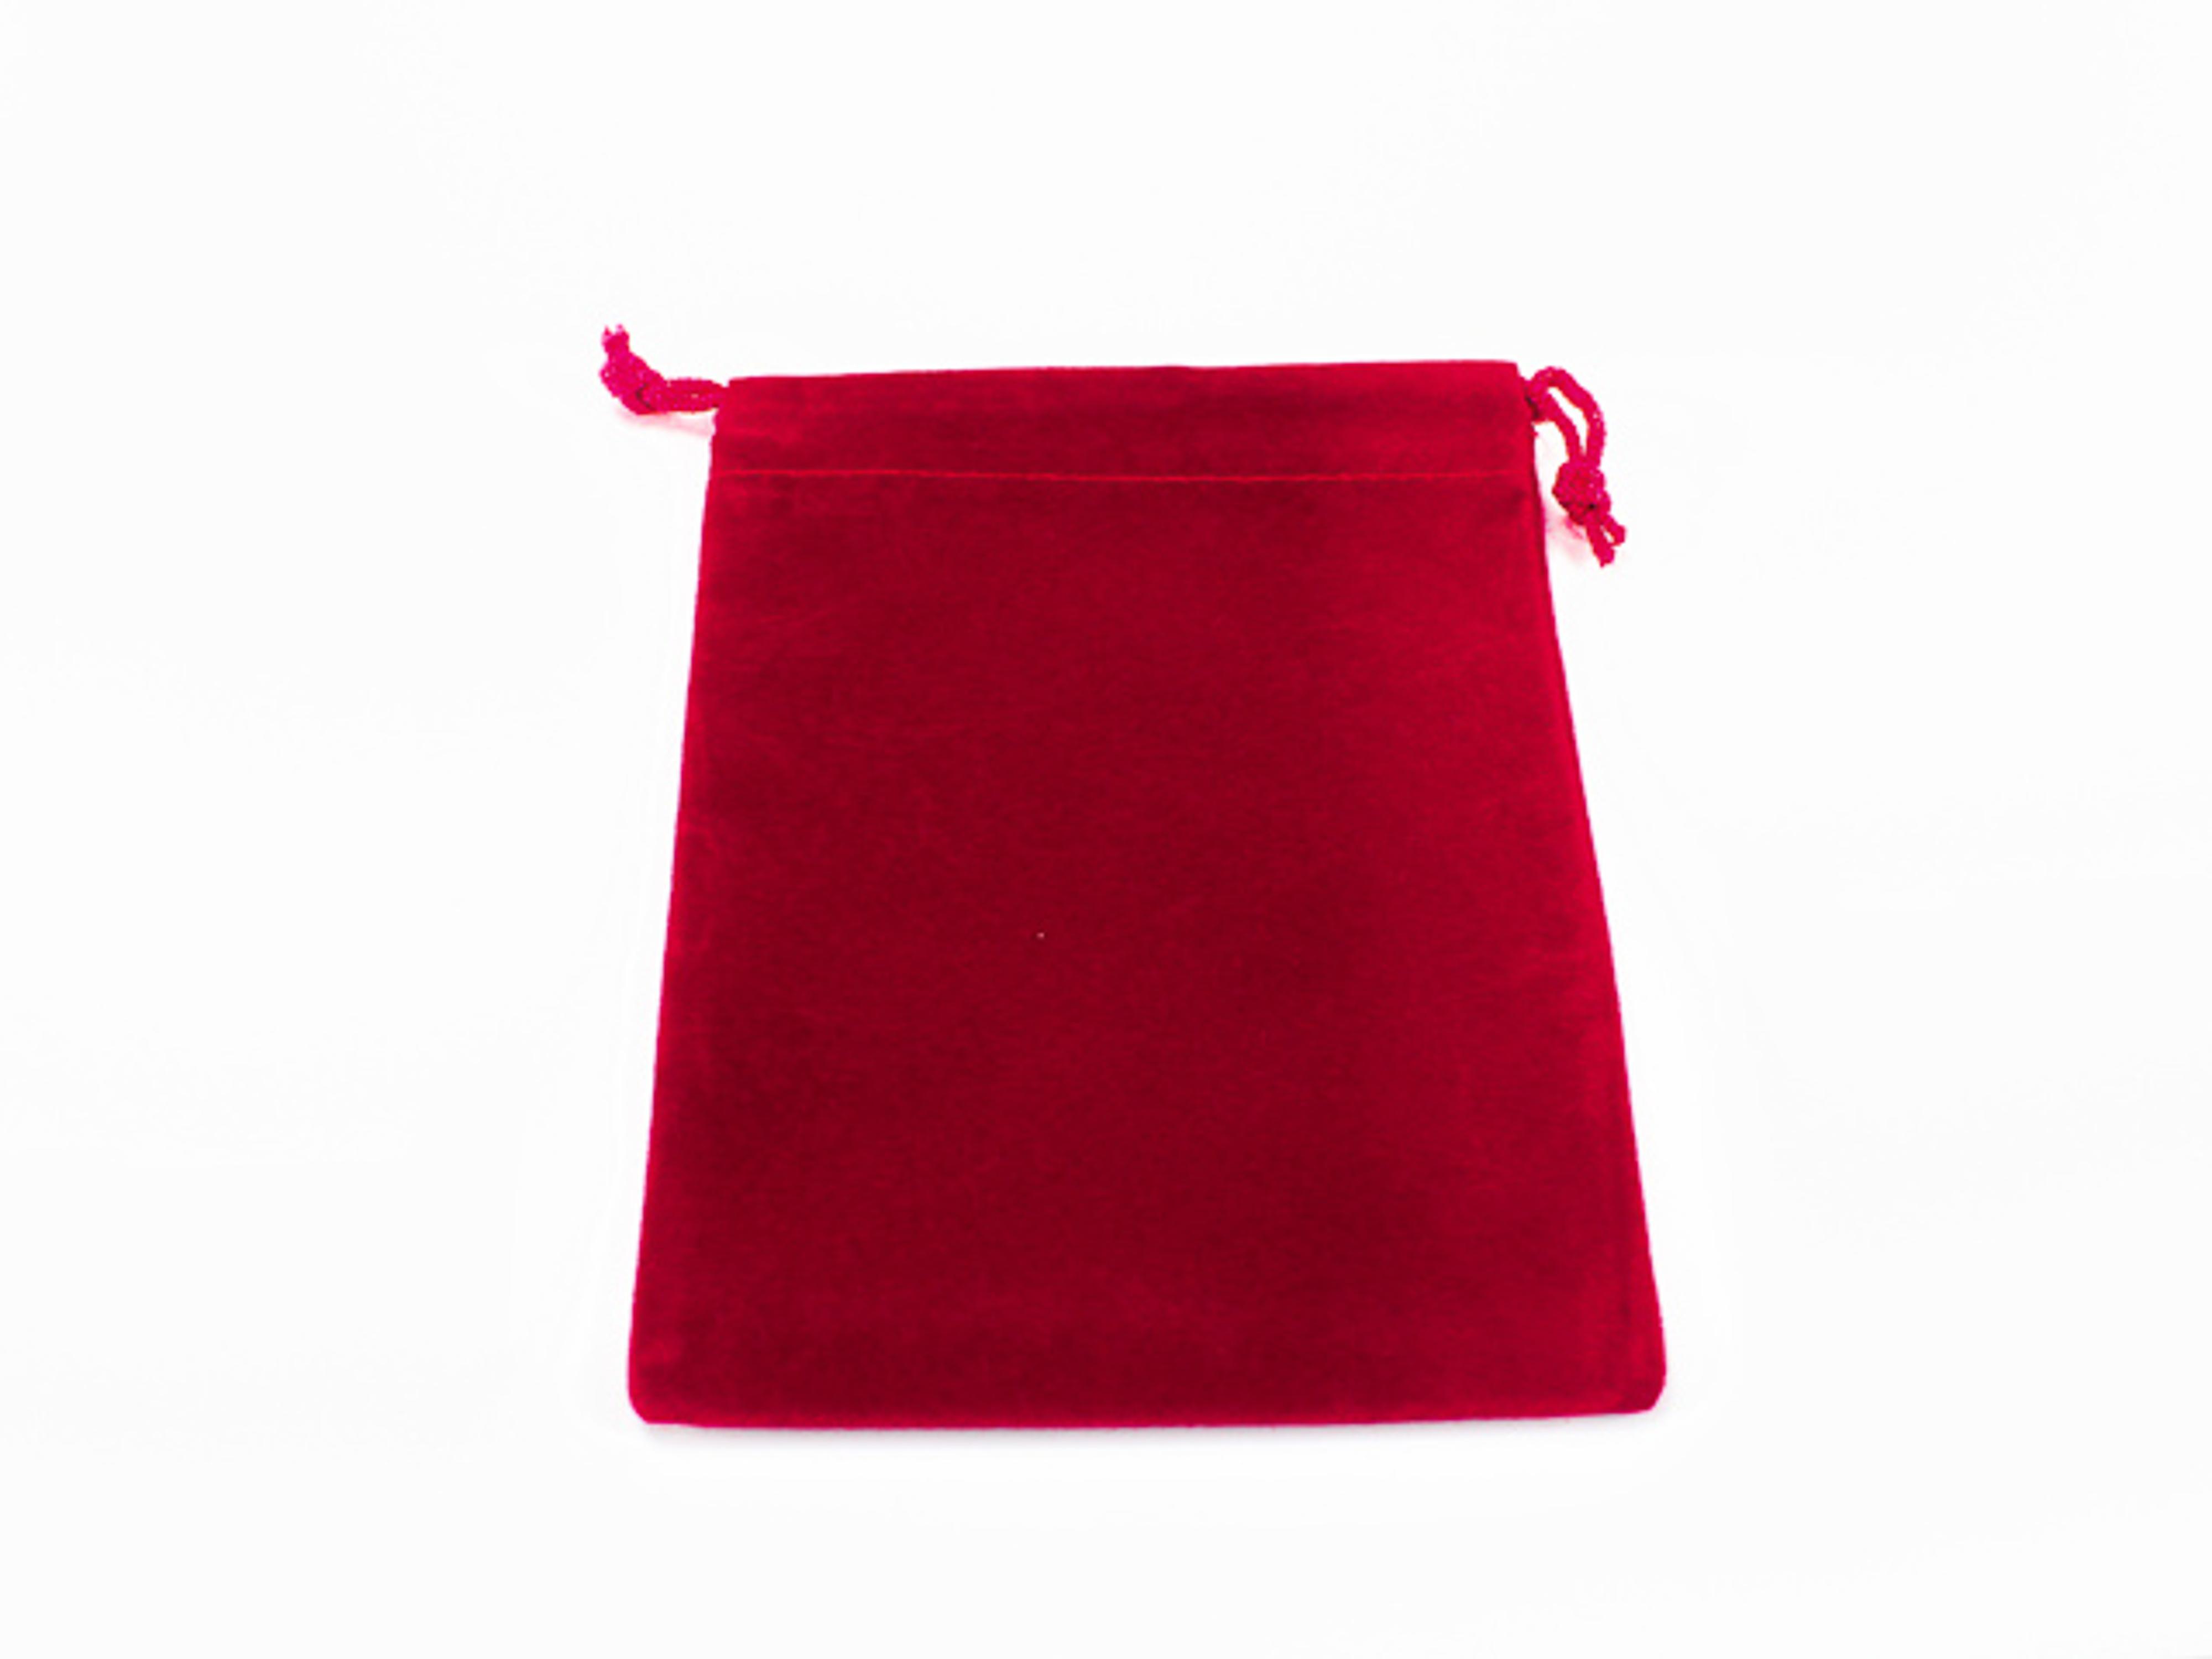 Chessex Suede Dice Bag (Small, Red)